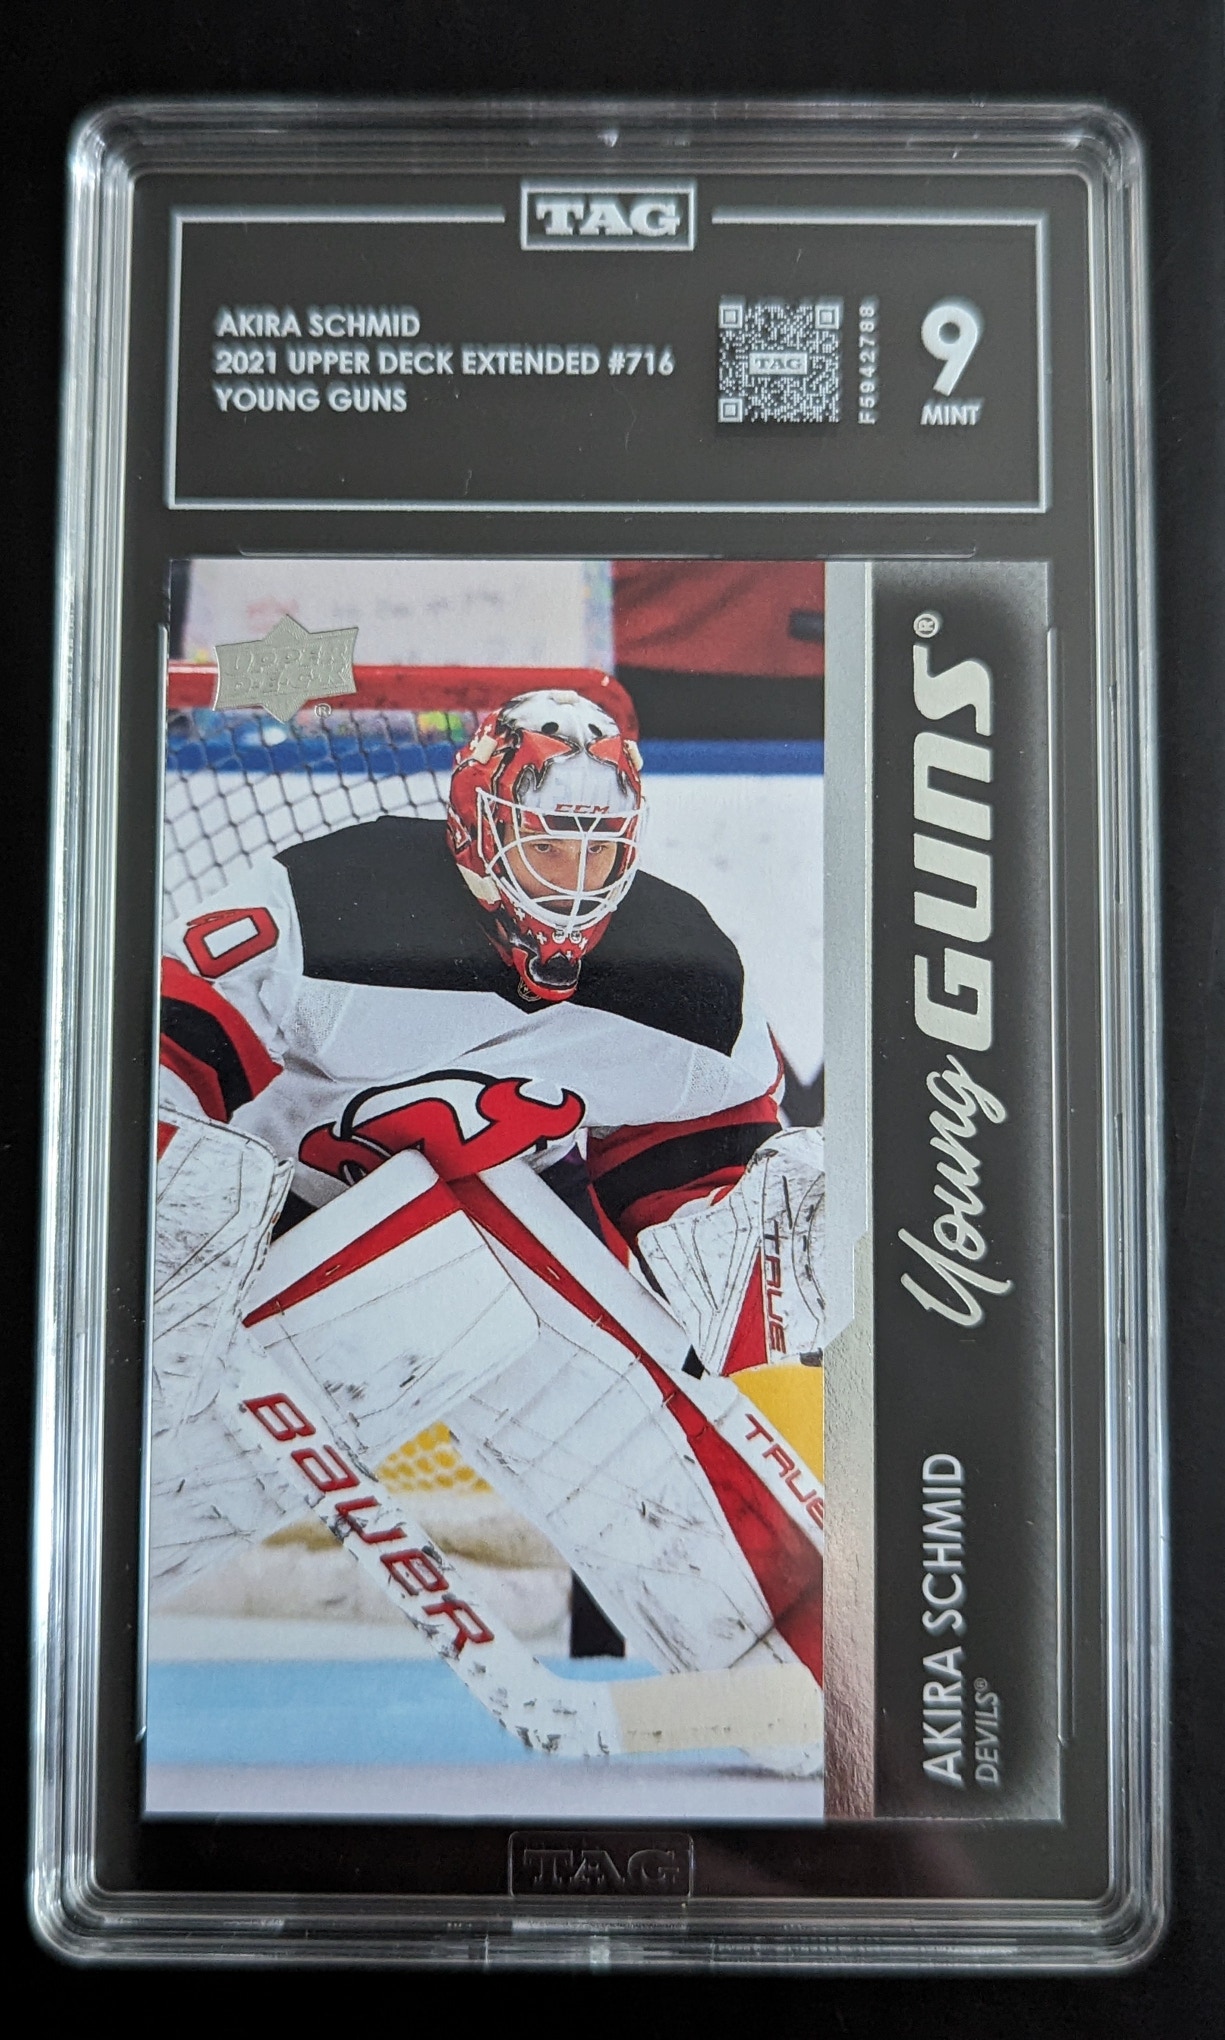 2021-22 Akira Schmid Young Guns TAG 9 Upper Deck Extended Series New Jersey Devils #716